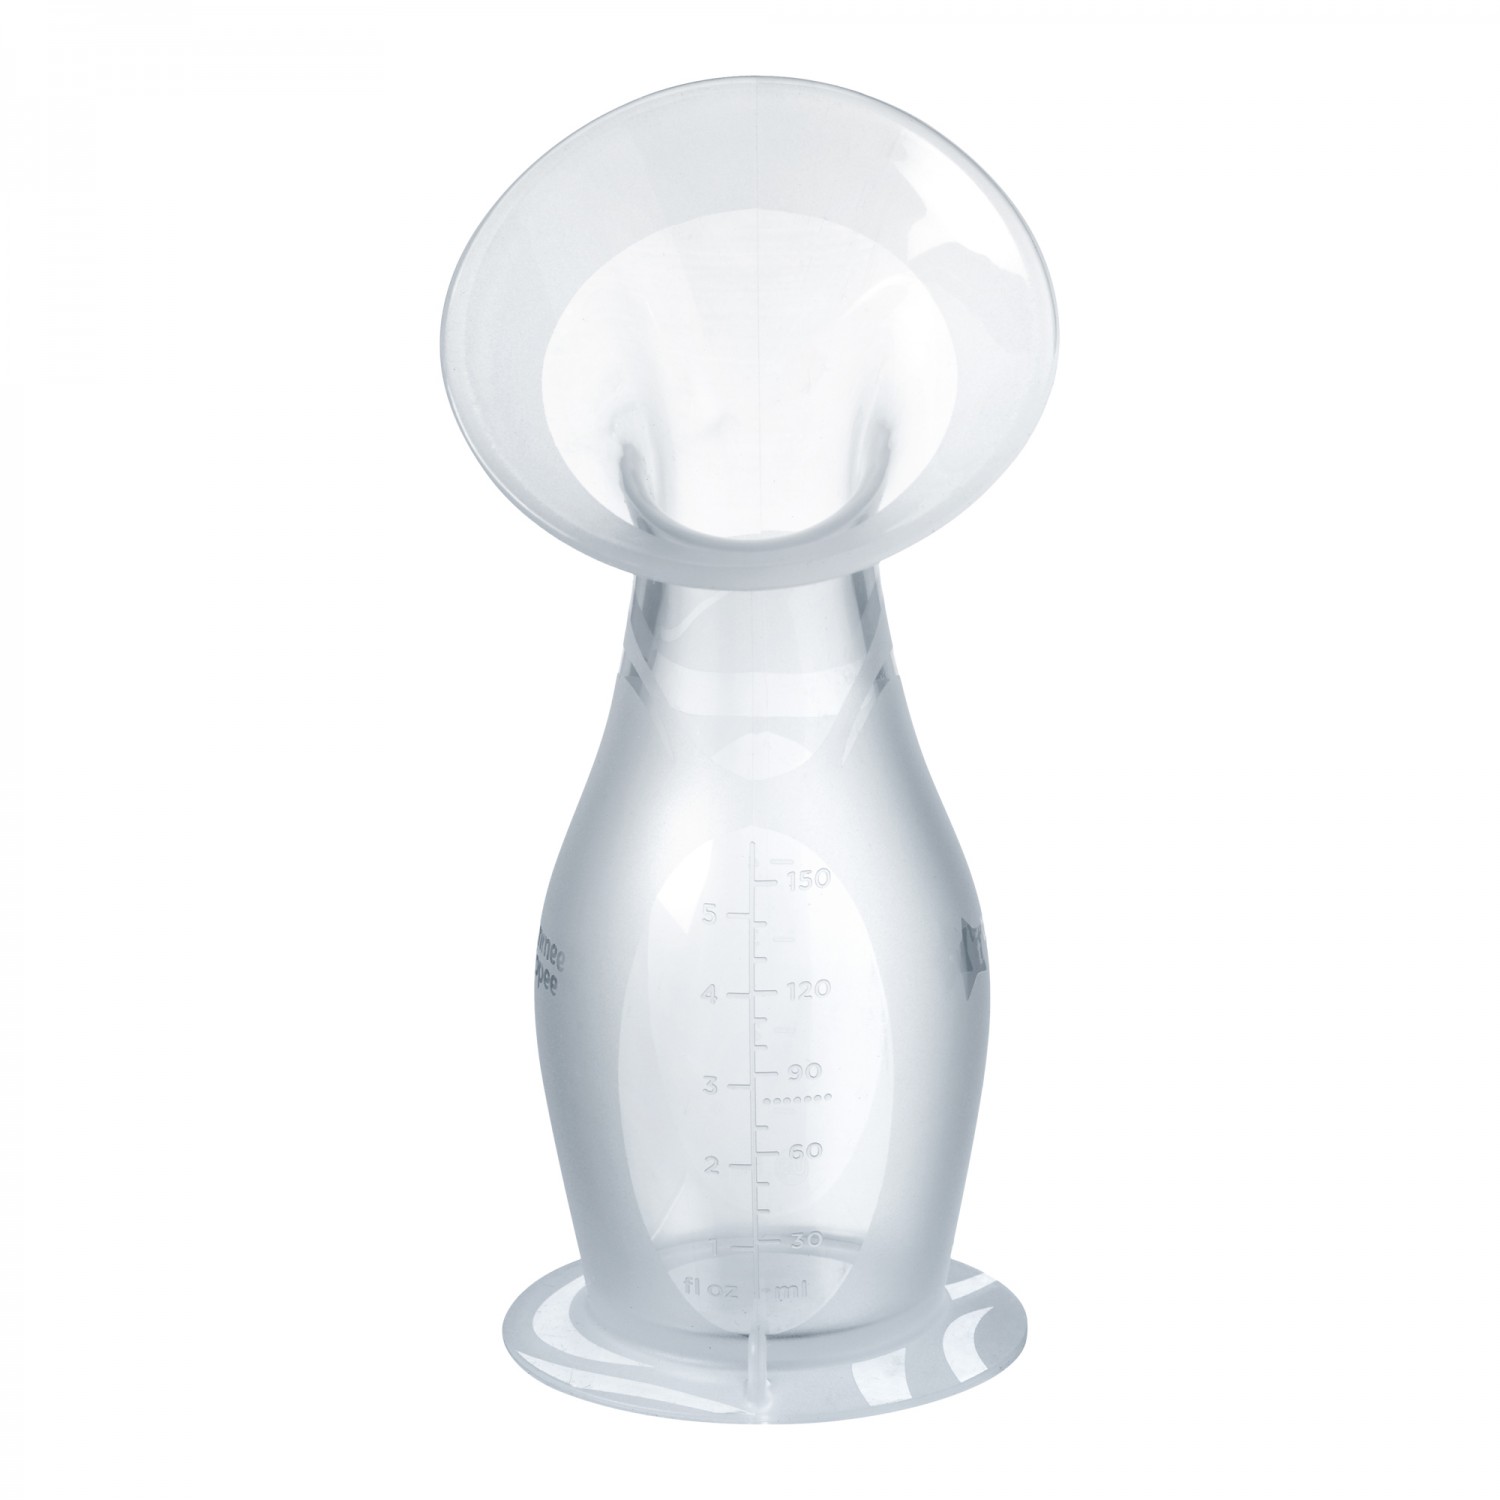 Pompa De San din Silicon, Tommee Tippee image 1